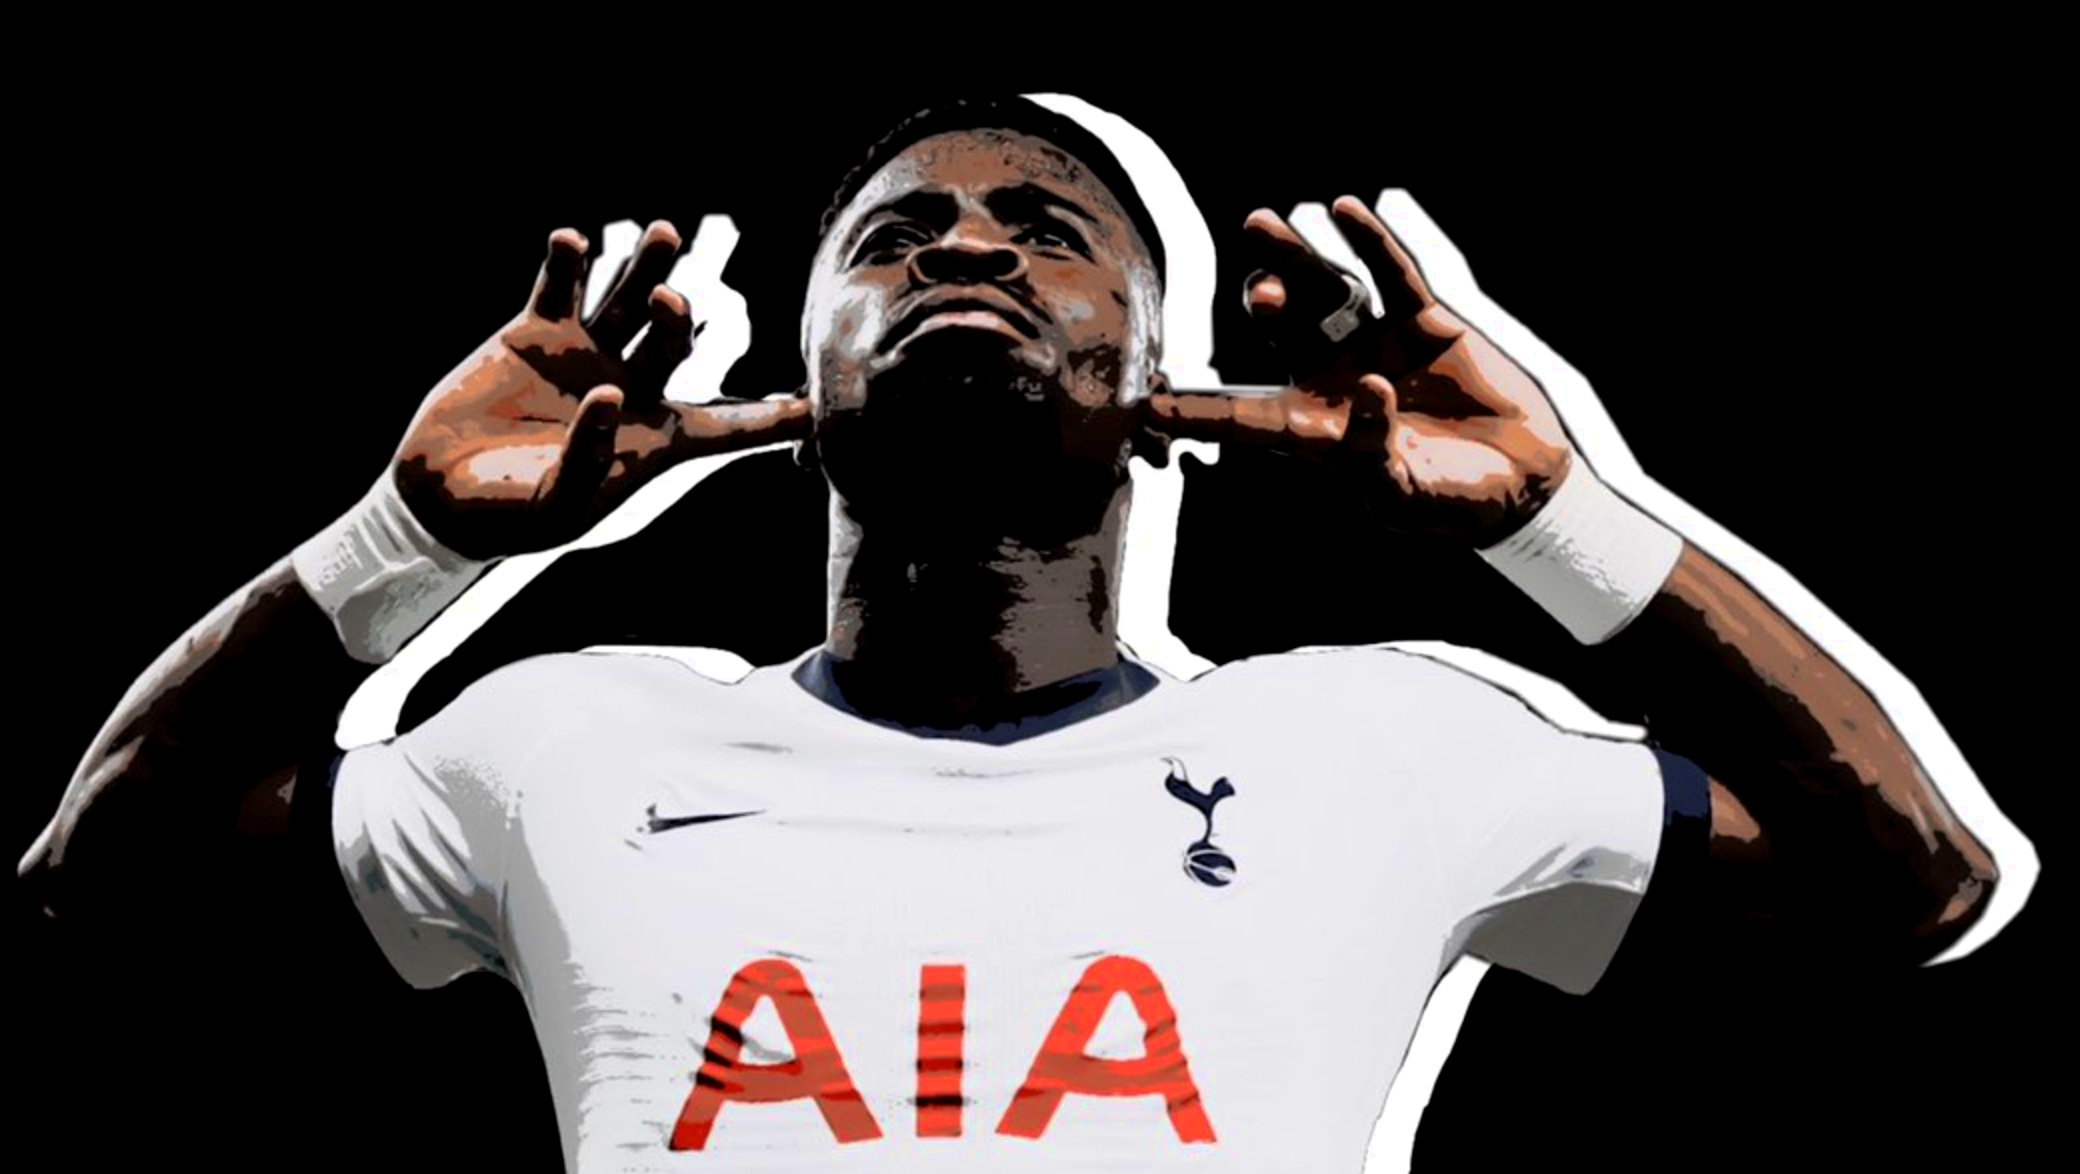 Inject It: Serge Aurier brushing stewards aside to celebrate with Tottenham fans after 3rd goal against Villa